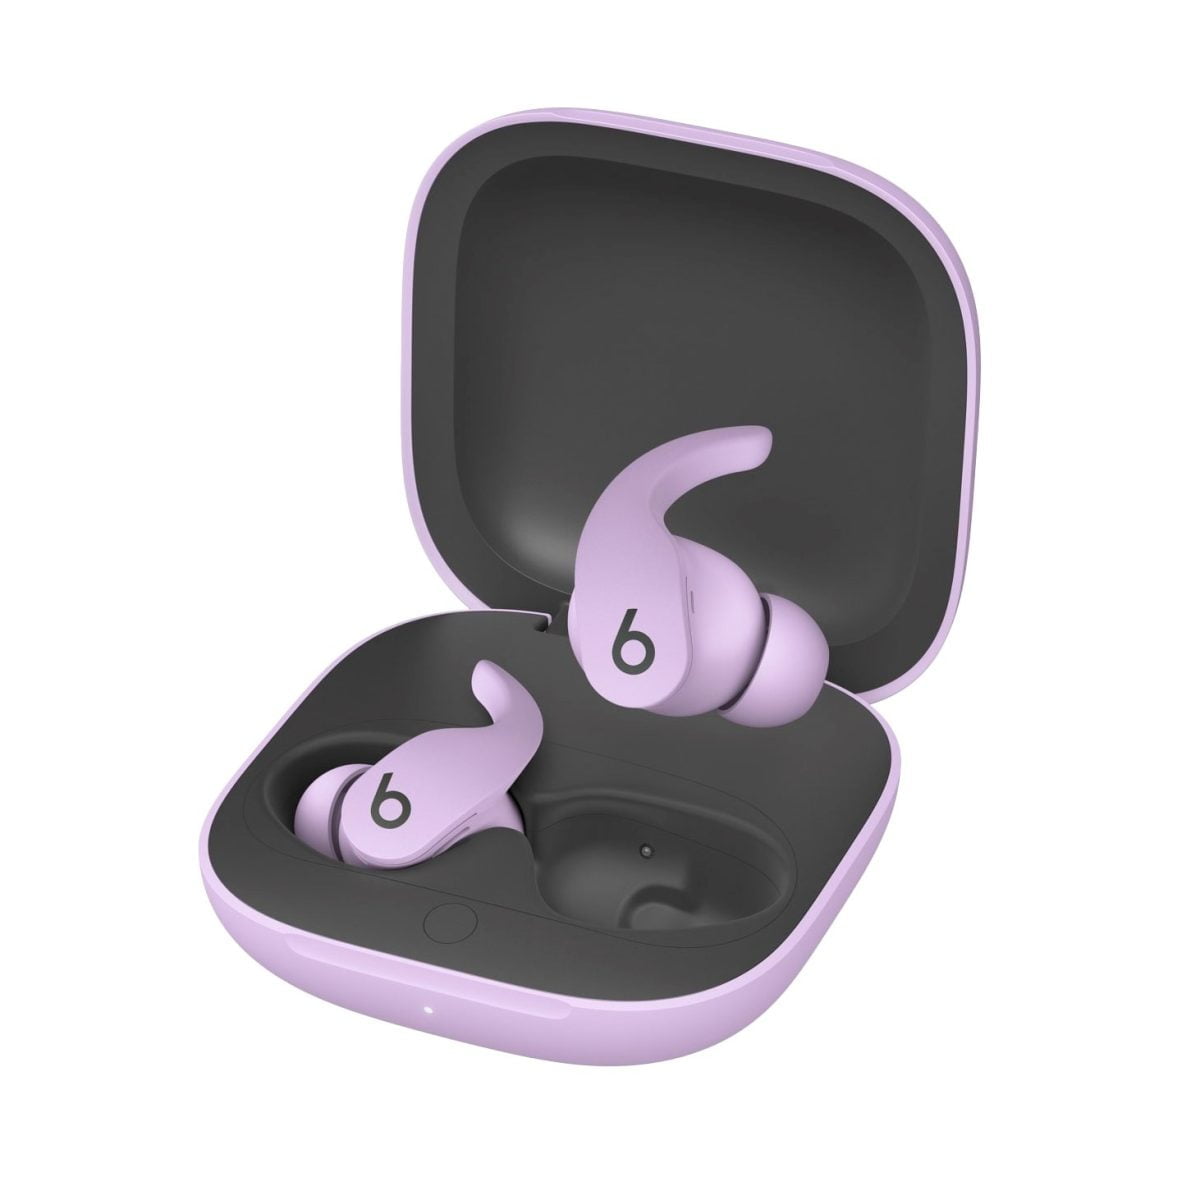 6490270 Rd Beats &Amp;Lt;H1 Class=&Amp;Quot;Heading-5 V-Fw-Regular&Amp;Quot;&Amp;Gt;Beats Fit Pro True Wireless Noise Cancelling In-Ear Headphones - Purple&Amp;Lt;/H1&Amp;Gt; Https://Www.youtube.com/Watch?V=Kzzb-Qssefg &Amp;Lt;Div Class=&Amp;Quot;Features-List-Container&Amp;Quot;&Amp;Gt; &Amp;Lt;Div Class=&Amp;Quot;Features-List All-Features&Amp;Quot;&Amp;Gt; &Amp;Lt;Div Class=&Amp;Quot;List-Row&Amp;Quot;&Amp;Gt; &Amp;Lt;P Class=&Amp;Quot;Body-Copy&Amp;Quot;&Amp;Gt;Beats Fit Pro Is Engineered To Deliver Powerful, Balanced Sound Via A Custom Acoustic Platform That Stays With You Through Your Daily Activities.a Proprietary, Dual-Element Diaphragm Driver Resides Within A Twochamber Housing Inside The Bluetooth® Earbuds, Resulting In Clear Sound With Outstanding Stereo Separation. An Advanced Digital Processor Then Optimizes Audio Performance For Loudness And Clarity, While Simultaneously Ensuring Clean Noise-Cancellation.beats Fit Pro Supports Spatial Audio With Dynamic Head Tracking For Immersive Music, Movies, And Games. Dynamic Head Tracking Uses Gyroscopes And Accelerometers To Adjust The Sound As You Turn Your Head, For A Multi-Dimensional Experience That Makes You Feel Like You’re Inside Of It.&Amp;Lt;/P&Amp;Gt; &Amp;Lt;/Div&Amp;Gt; &Amp;Lt;/Div&Amp;Gt; &Amp;Lt;/Div&Amp;Gt; Beats Fit Pro Beats Fit Pro True Wireless Noise Cancelling In-Ear Headphones - Purple Mk2H3